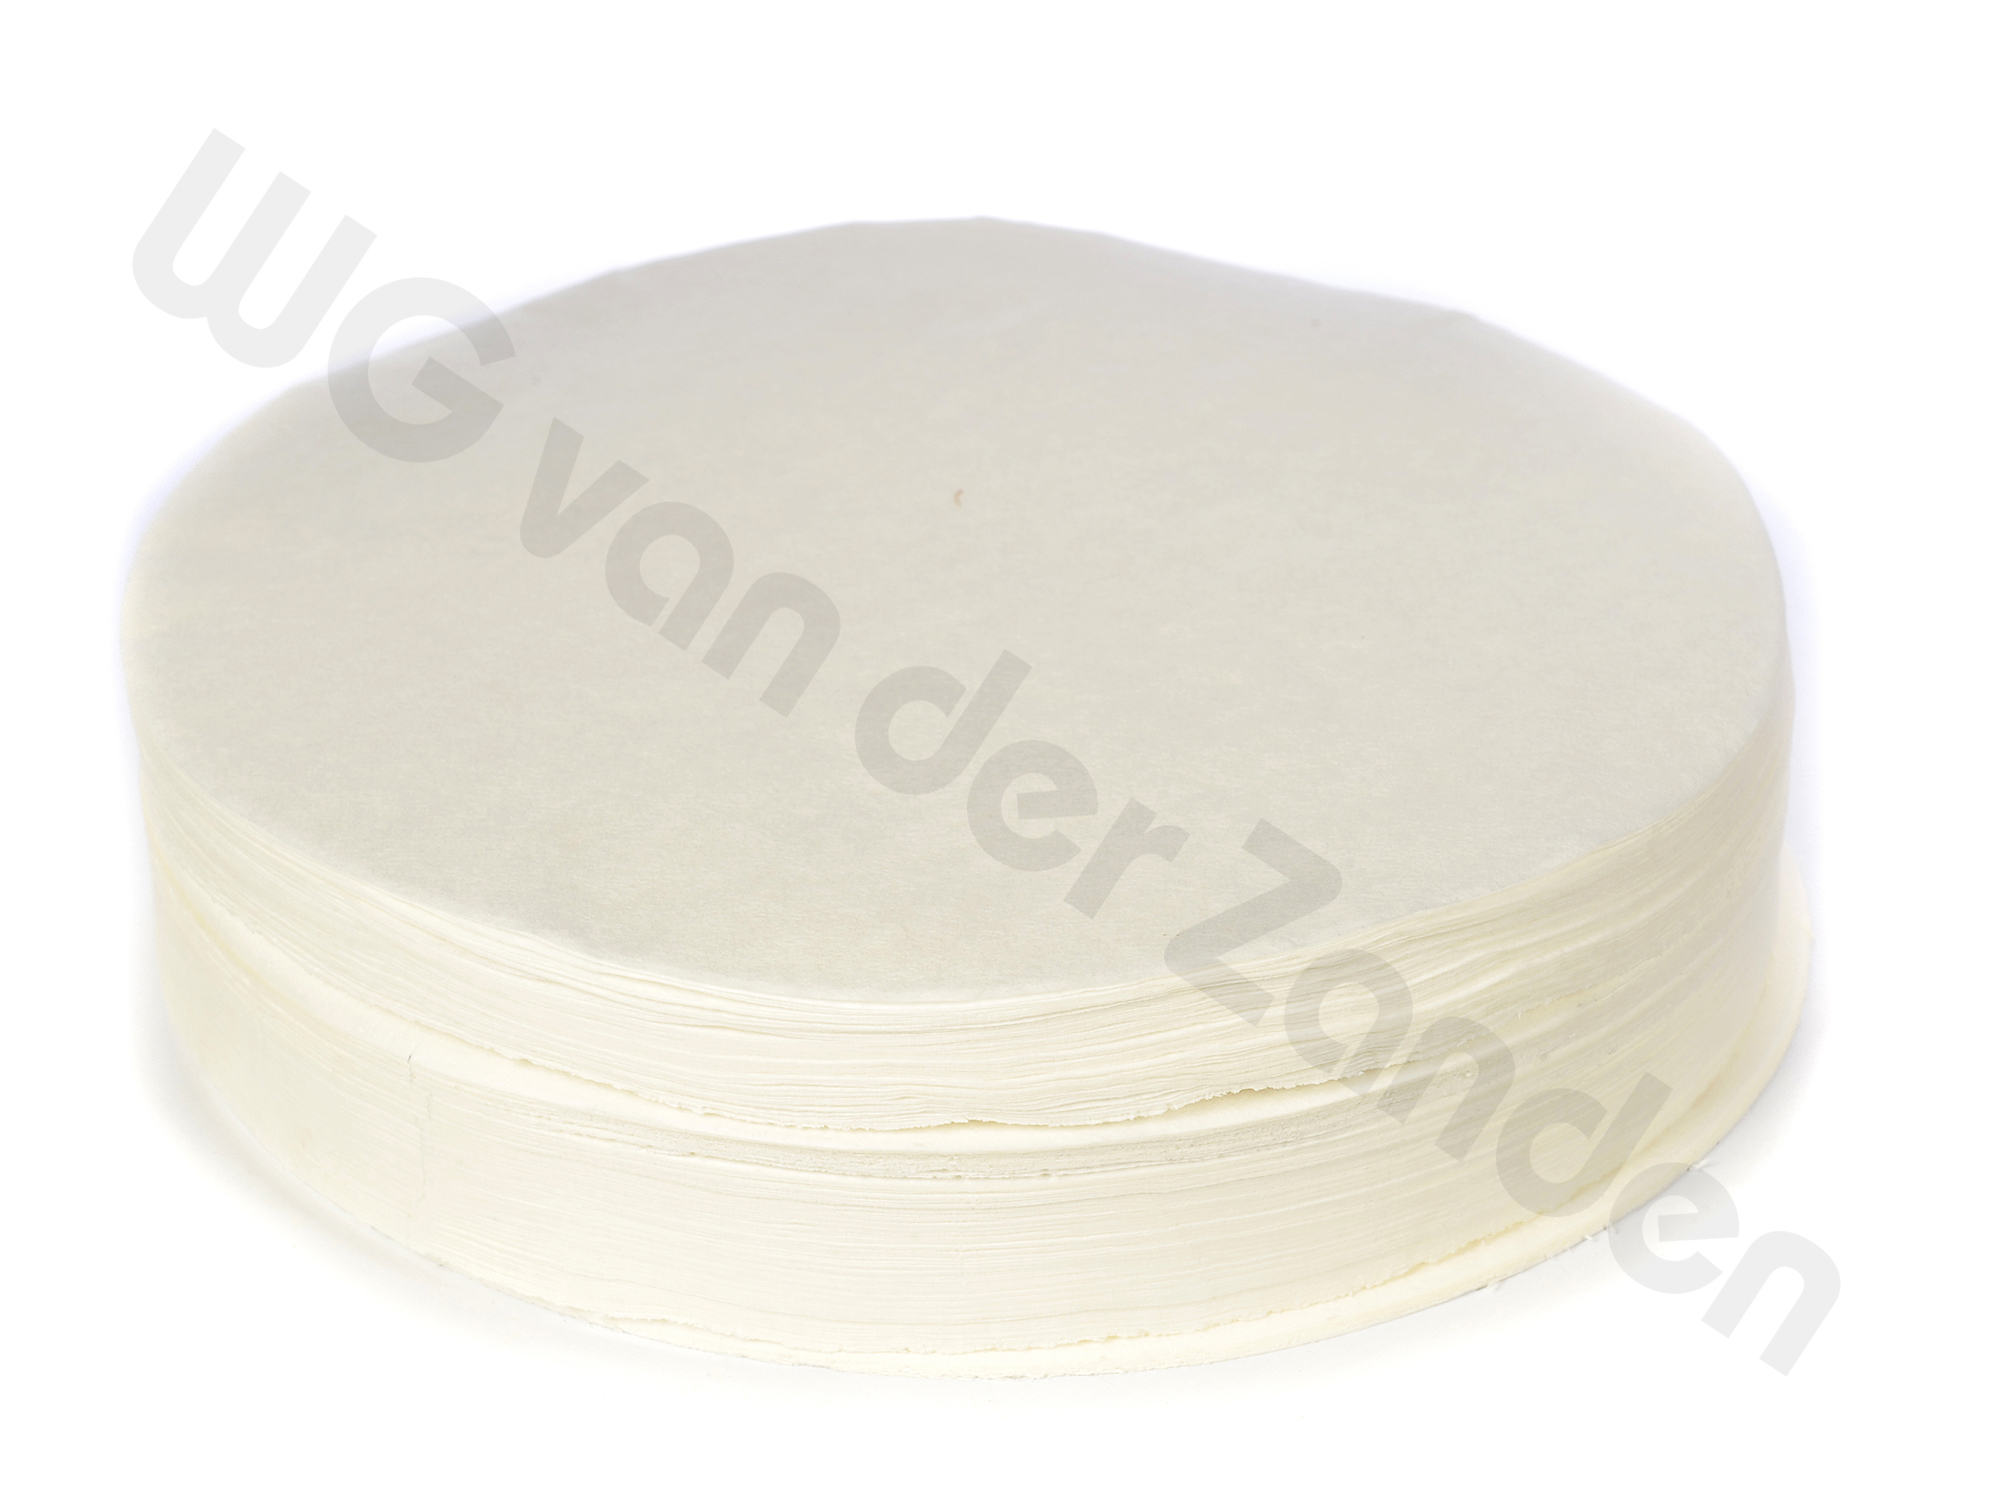 669770 KOFFIEFILTERS ROND B5 172MMØ